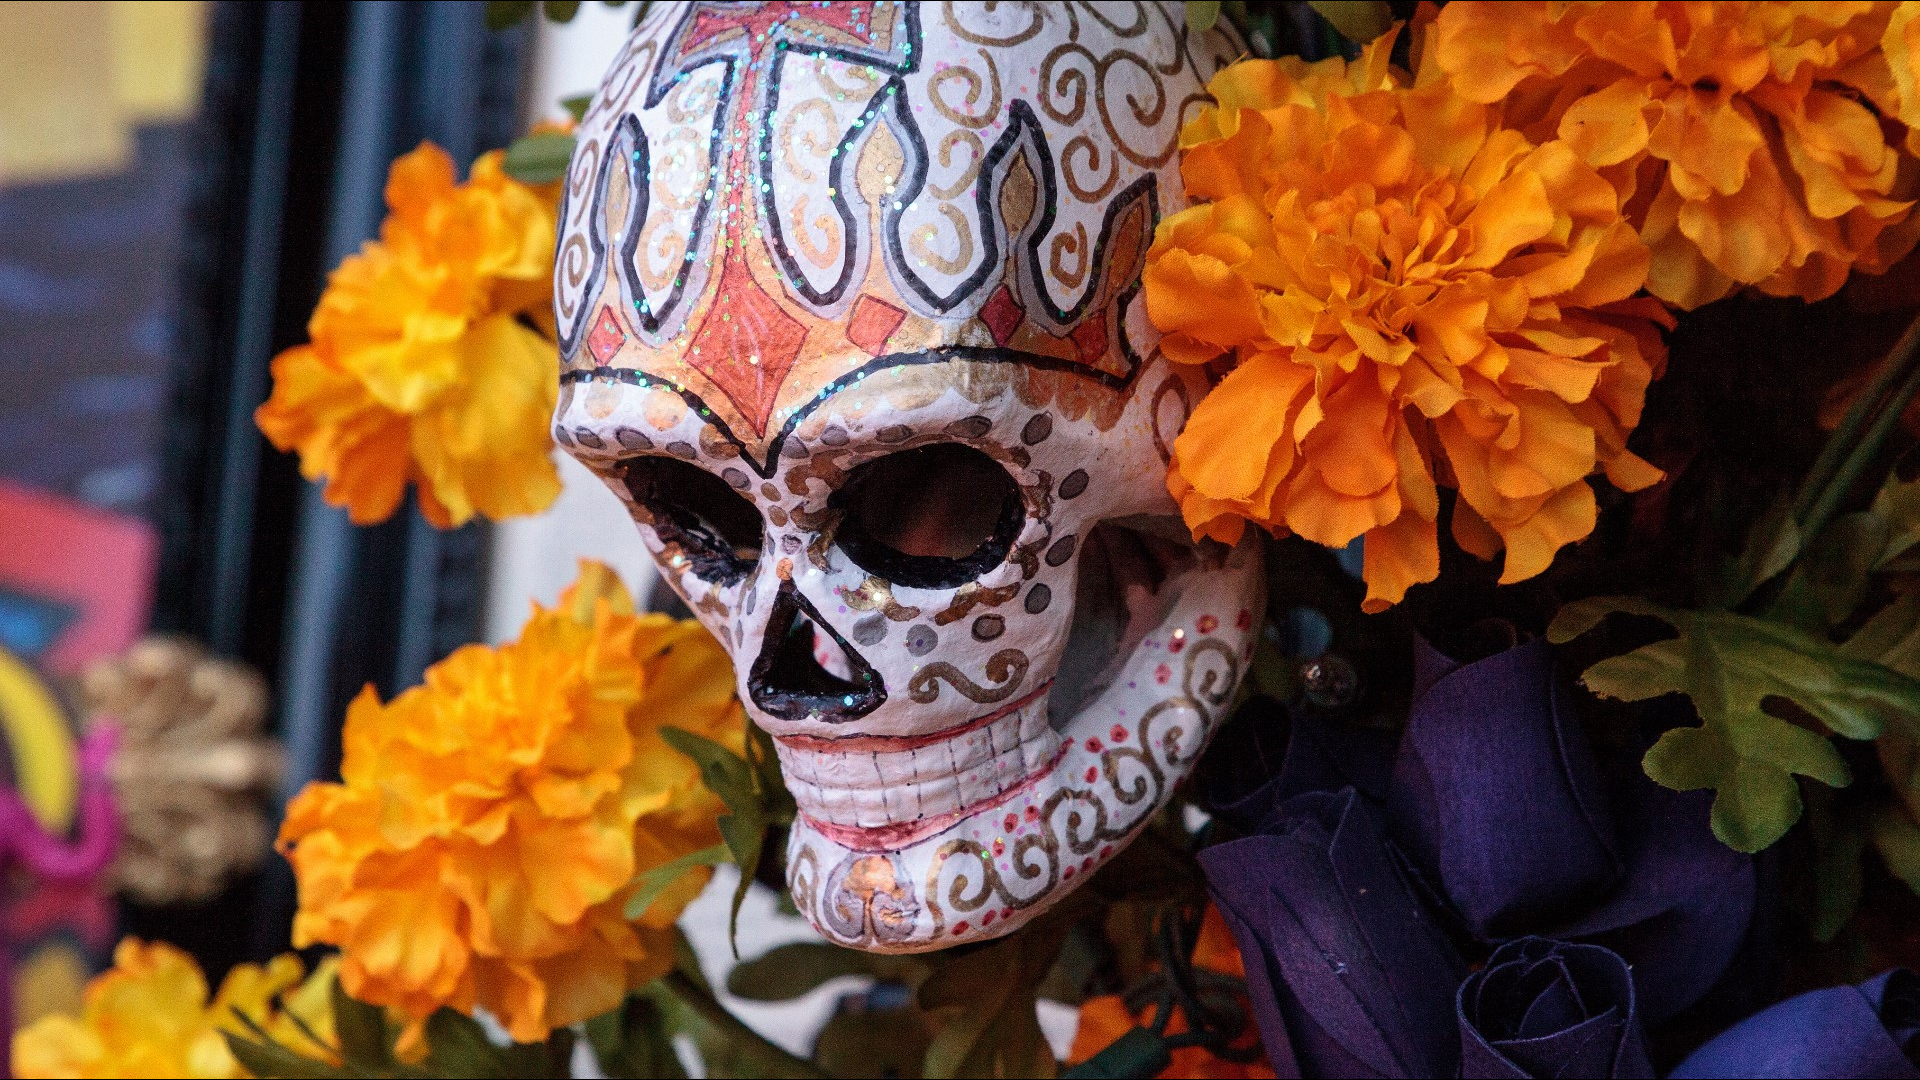 The holiday is often misinterpreted as Mexico's version of Halloween. It's more of a time of prayer and remembrance for friends and family members who have died.